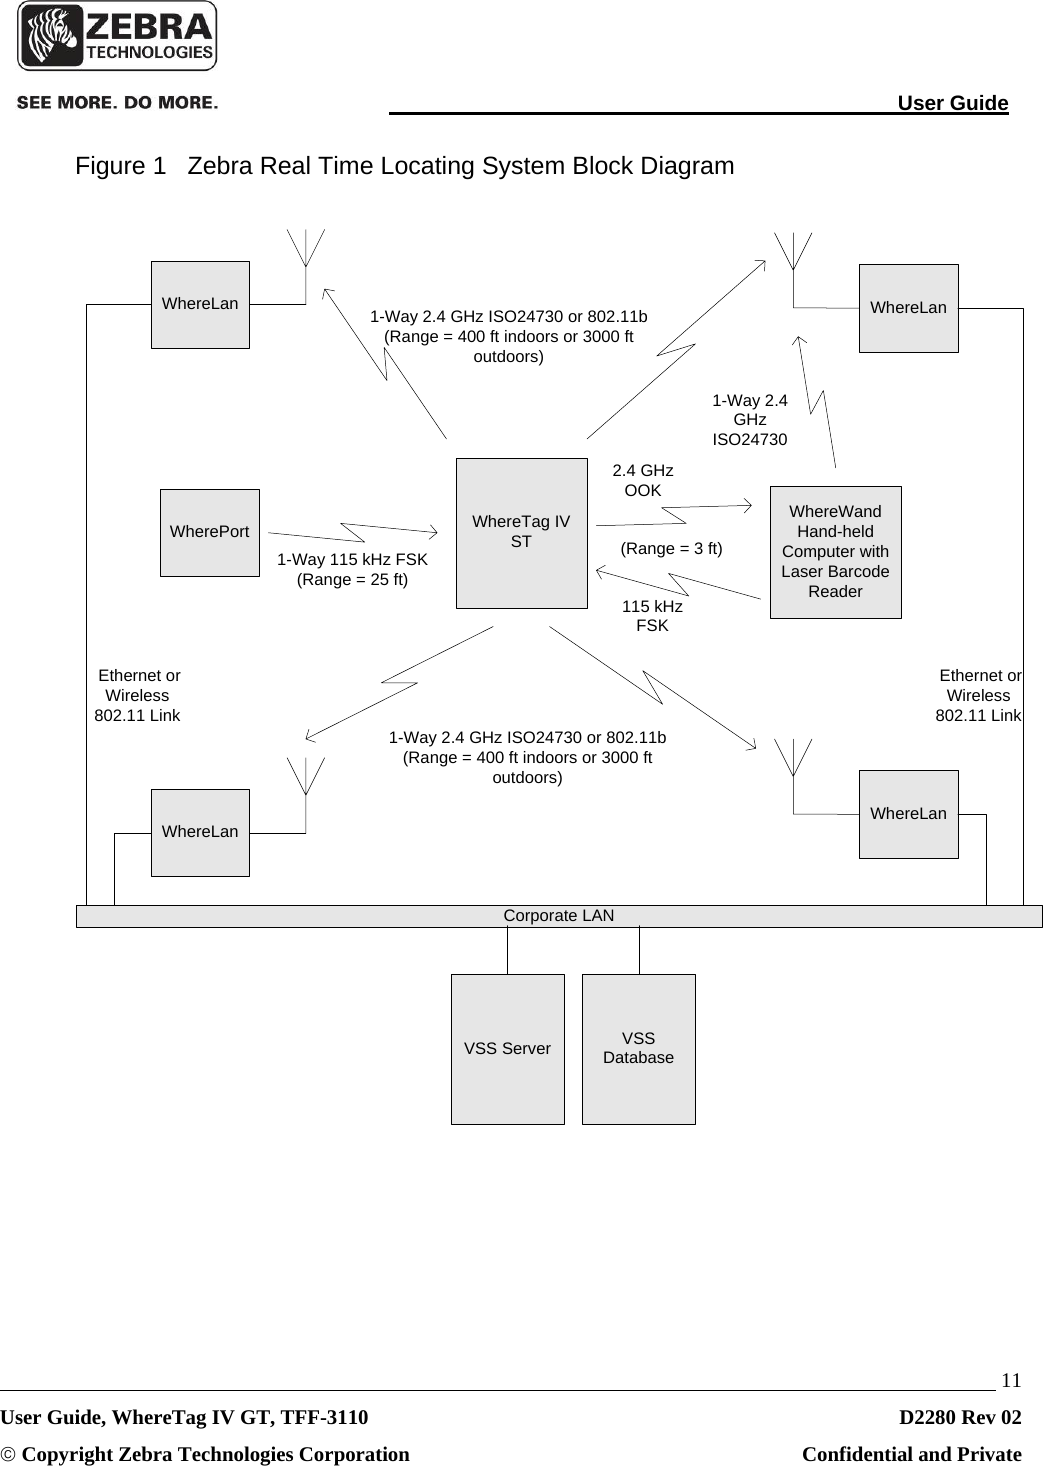                                                                                                                                User Guide   11 User Guide, WhereTag IV GT, TFF-3110  D2280 Rev 02 © Copyright Zebra Technologies Corporation  Confidential and Private Figure 1   Zebra Real Time Locating System Block Diagram WhereTag IV STVSS Server VSS Database1-Way 2.4 GHz ISO24730 or 802.11b(Range = 400 ft indoors or 3000 ft outdoors) WherePort 1-Way 115 kHz FSK(Range = 25 ft) WhereWandHand-held Computer with Laser Barcode Reader115 kHz FSK2.4 GHz OOK(Range = 3 ft)1-Way 2.4 GHz ISO24730WhereLan WhereLanWhereLanWhereLanCorporate LANEthernet or Wireless 802.11 LinkEthernet or Wireless 802.11 Link1-Way 2.4 GHz ISO24730 or 802.11b(Range = 400 ft indoors or 3000 ft outdoors)   